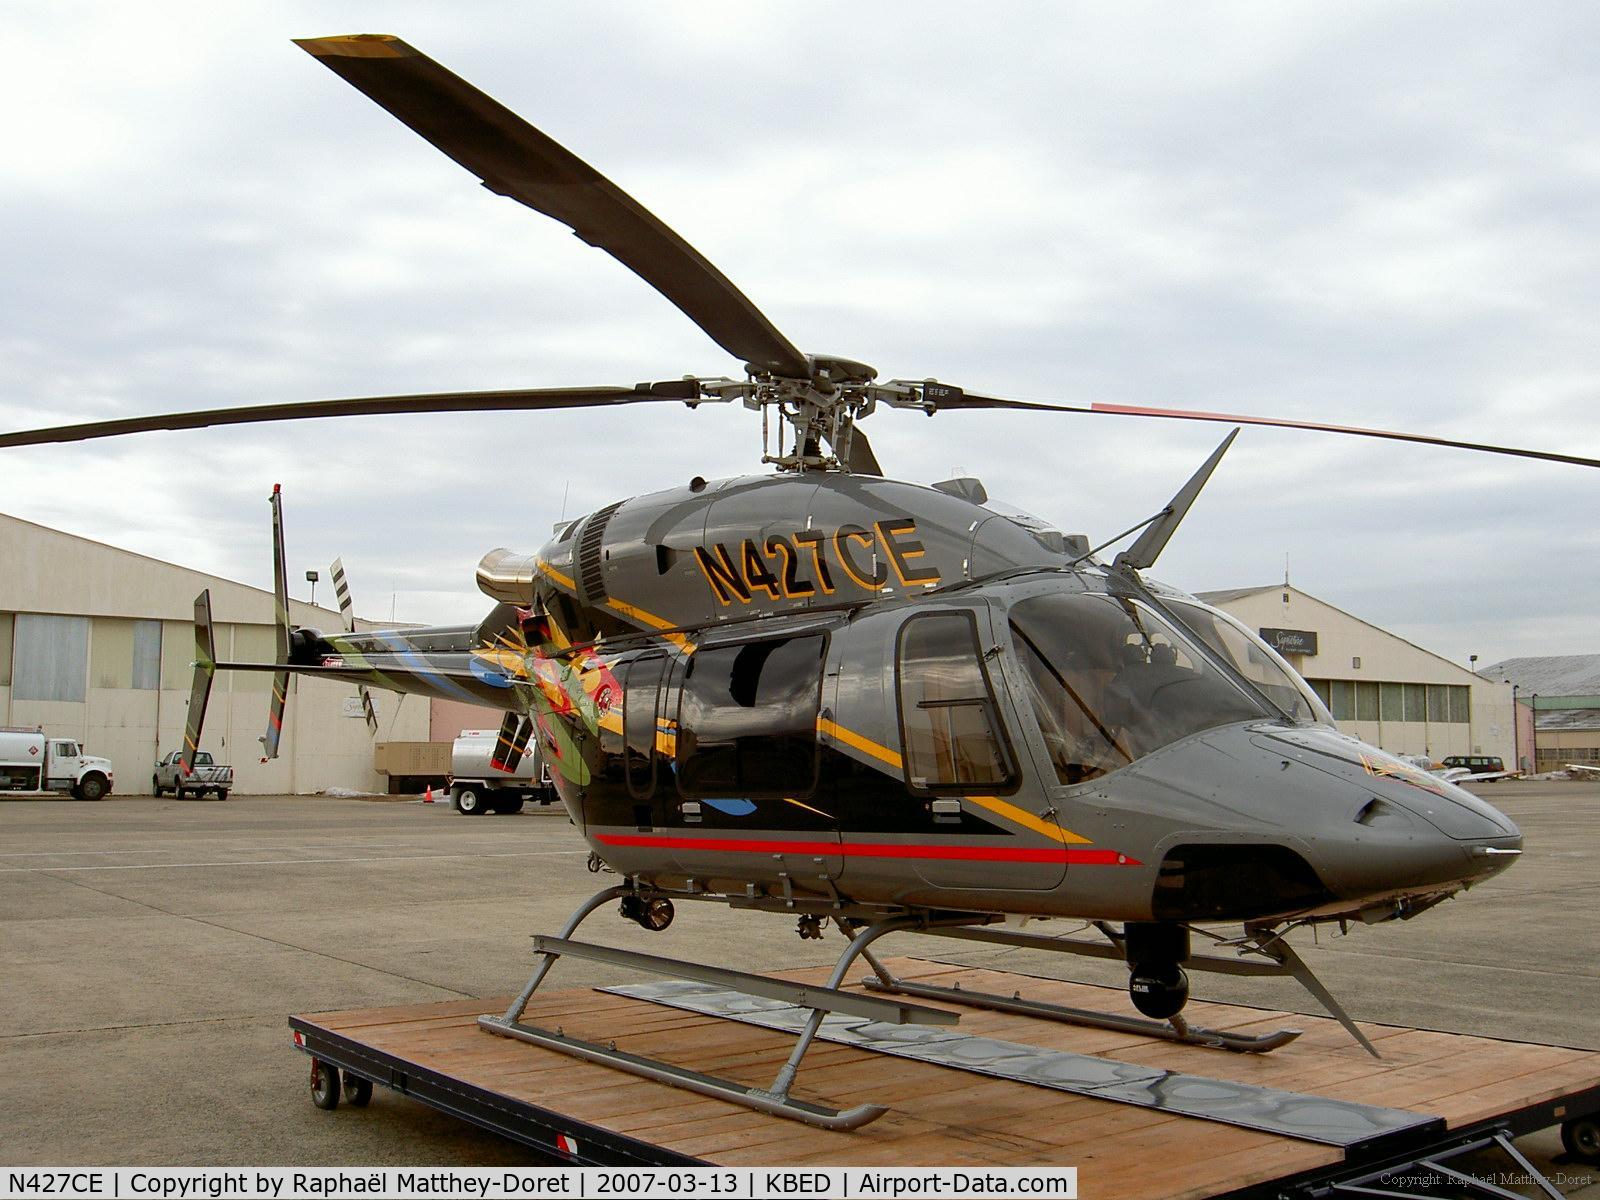 N427CE, 2006 Bell 427 C/N 56054, On the rampe at Hanscom airfield (KBED), MA